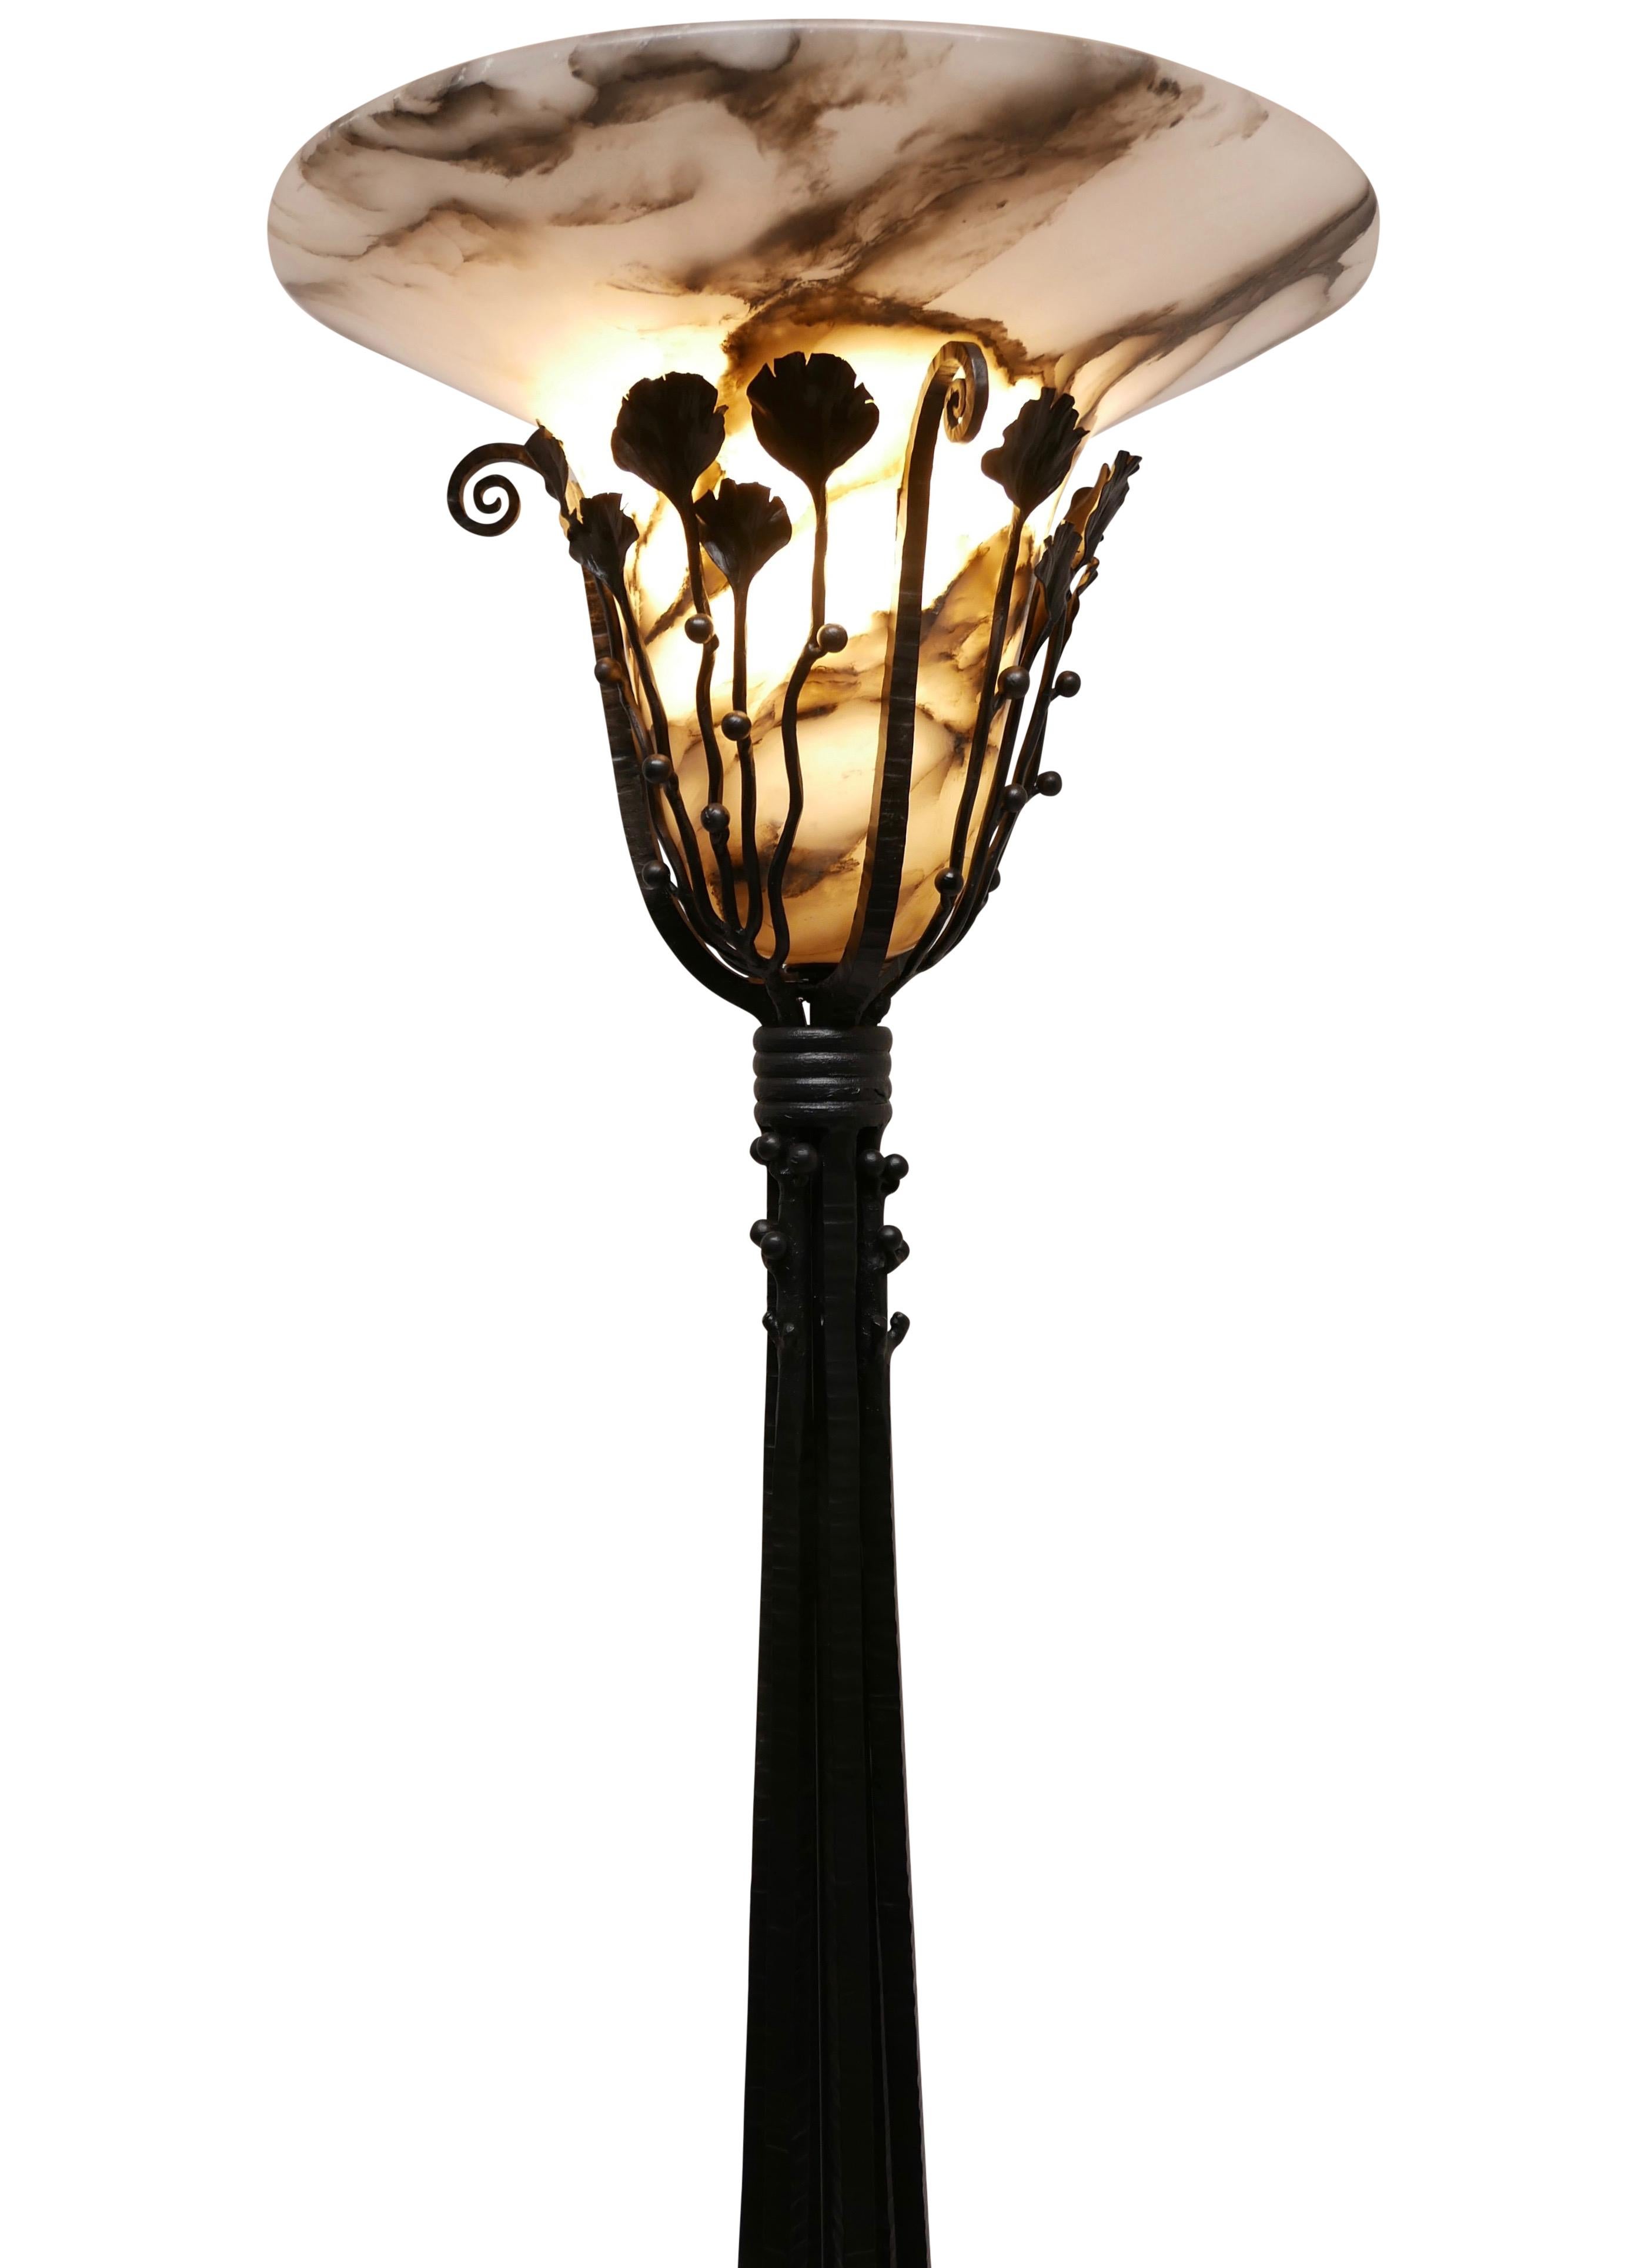 Art Deco Wrought Iron Floor Lamp with Alabaster Shade, French, circa 1920 For Sale 4